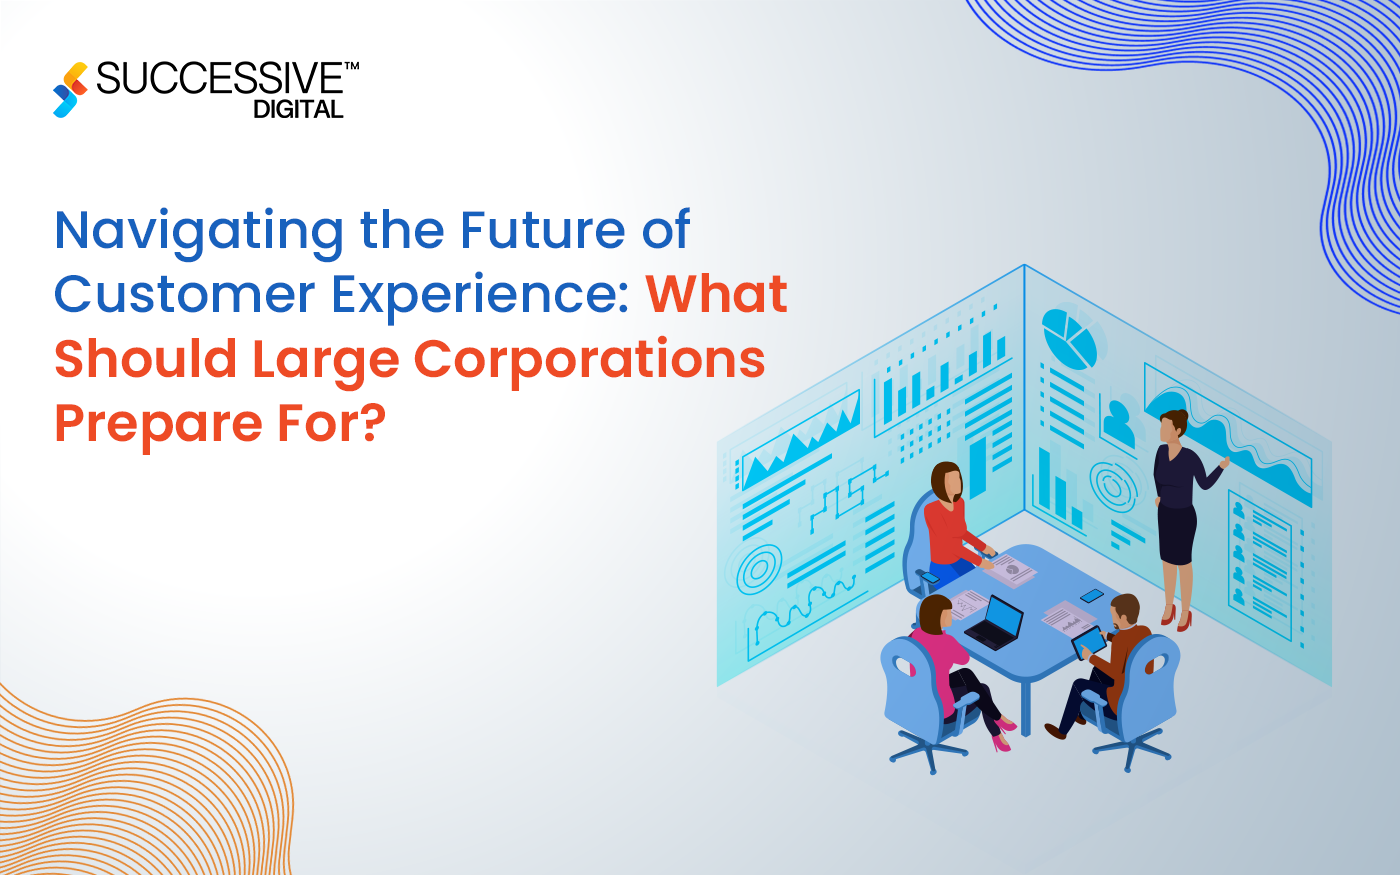 Navigating the Future of Customer Experience: What Should Large Corporations Prepare For?